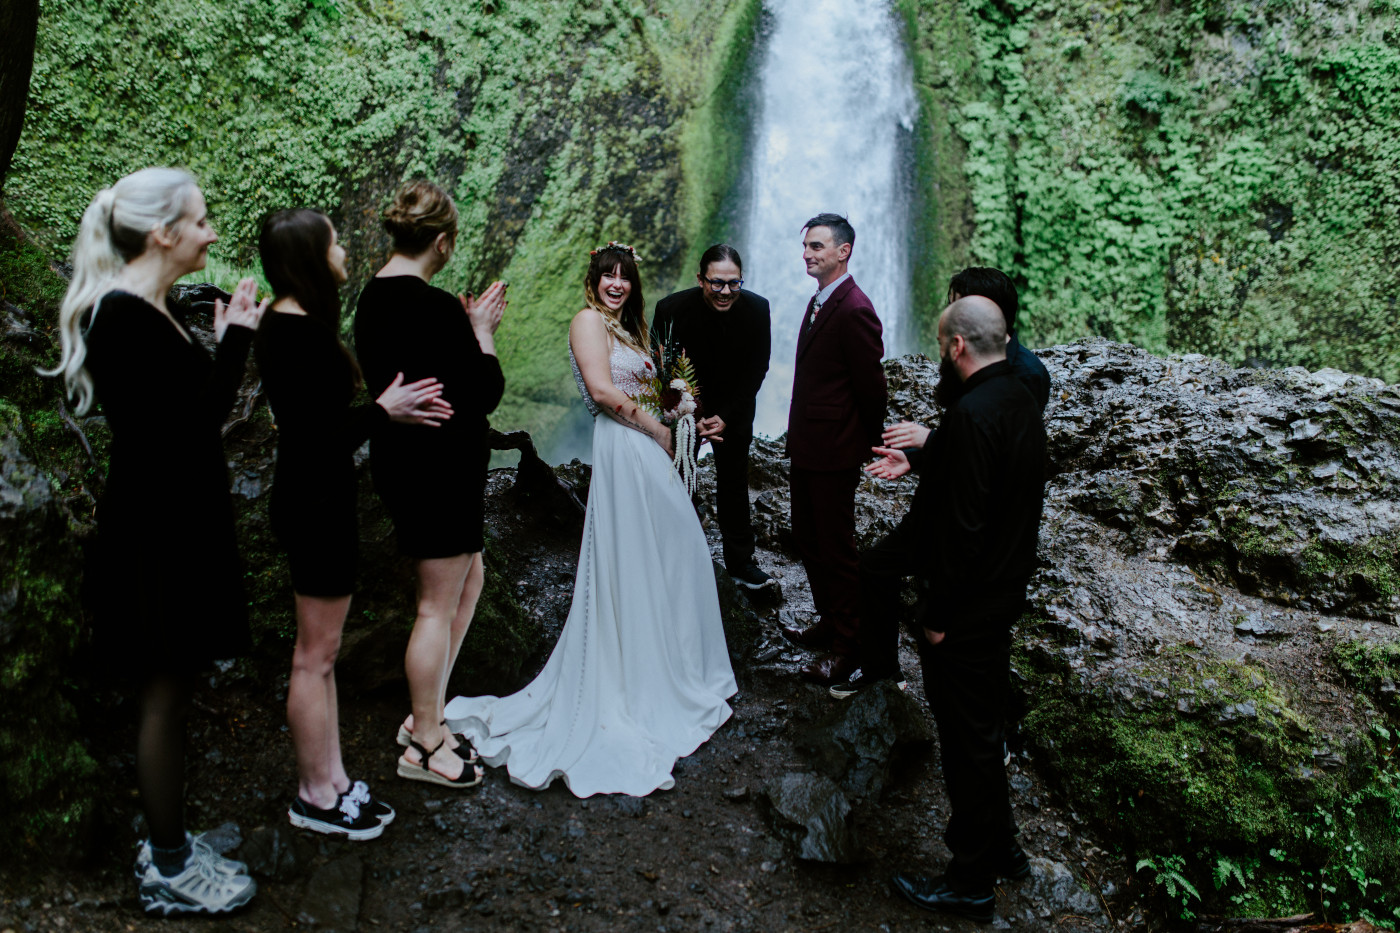 Jordan and Andrew begin their elopement ceremony in front of Wahclella Falls.